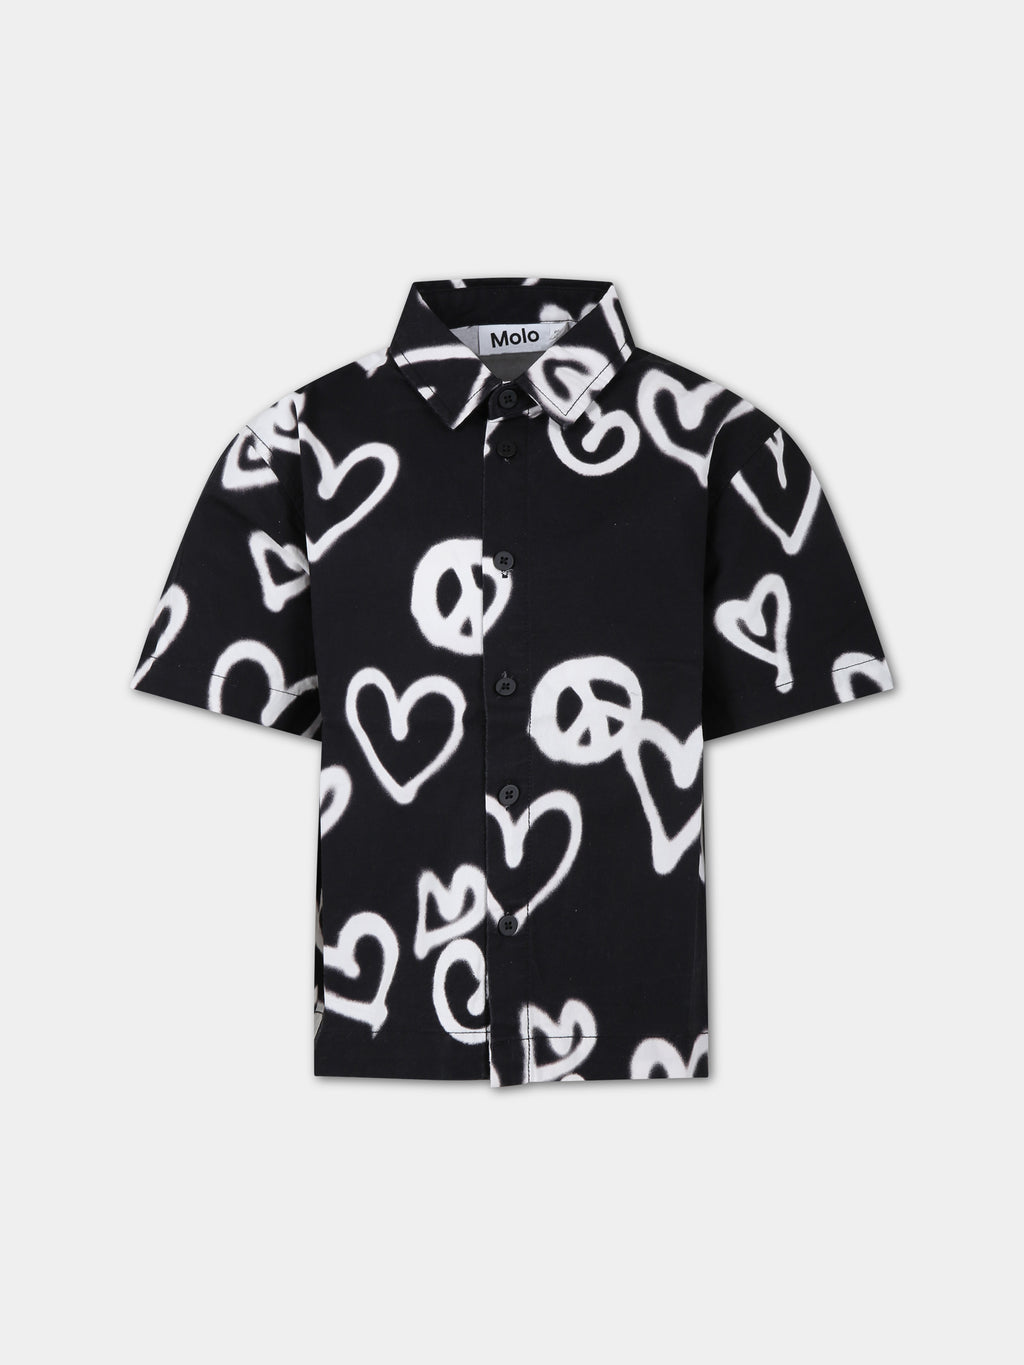 Black shirt for boy with white hearts